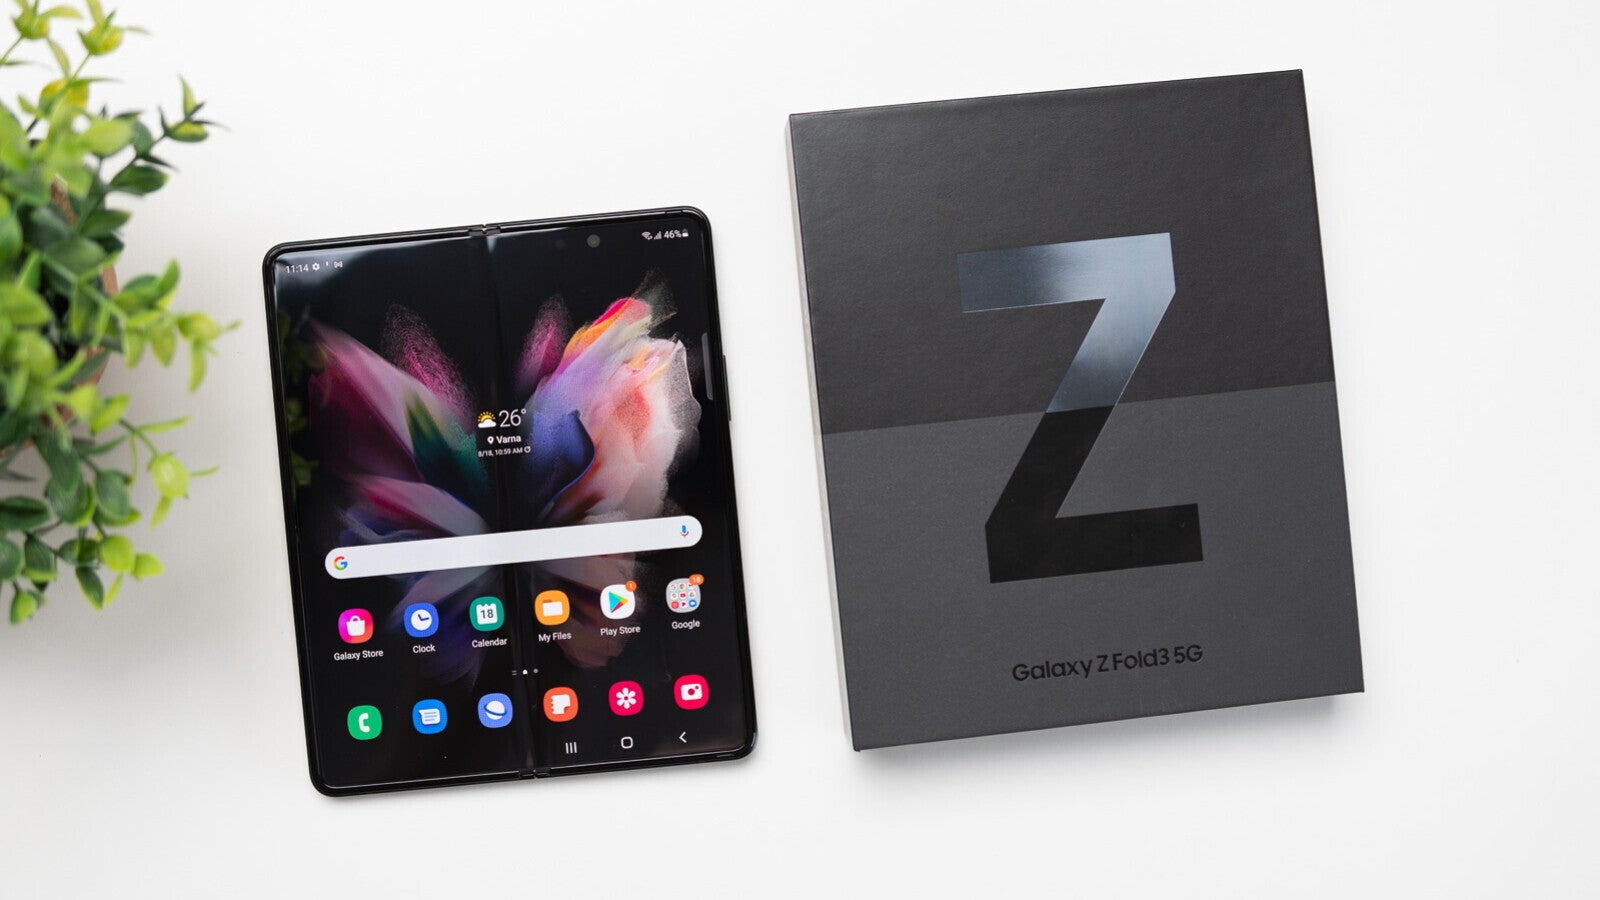 Samsung Galaxy Z Fold 3 - Oppo's upcoming foldable could rival the Galaxy Z Fold 3, according to a recent leak